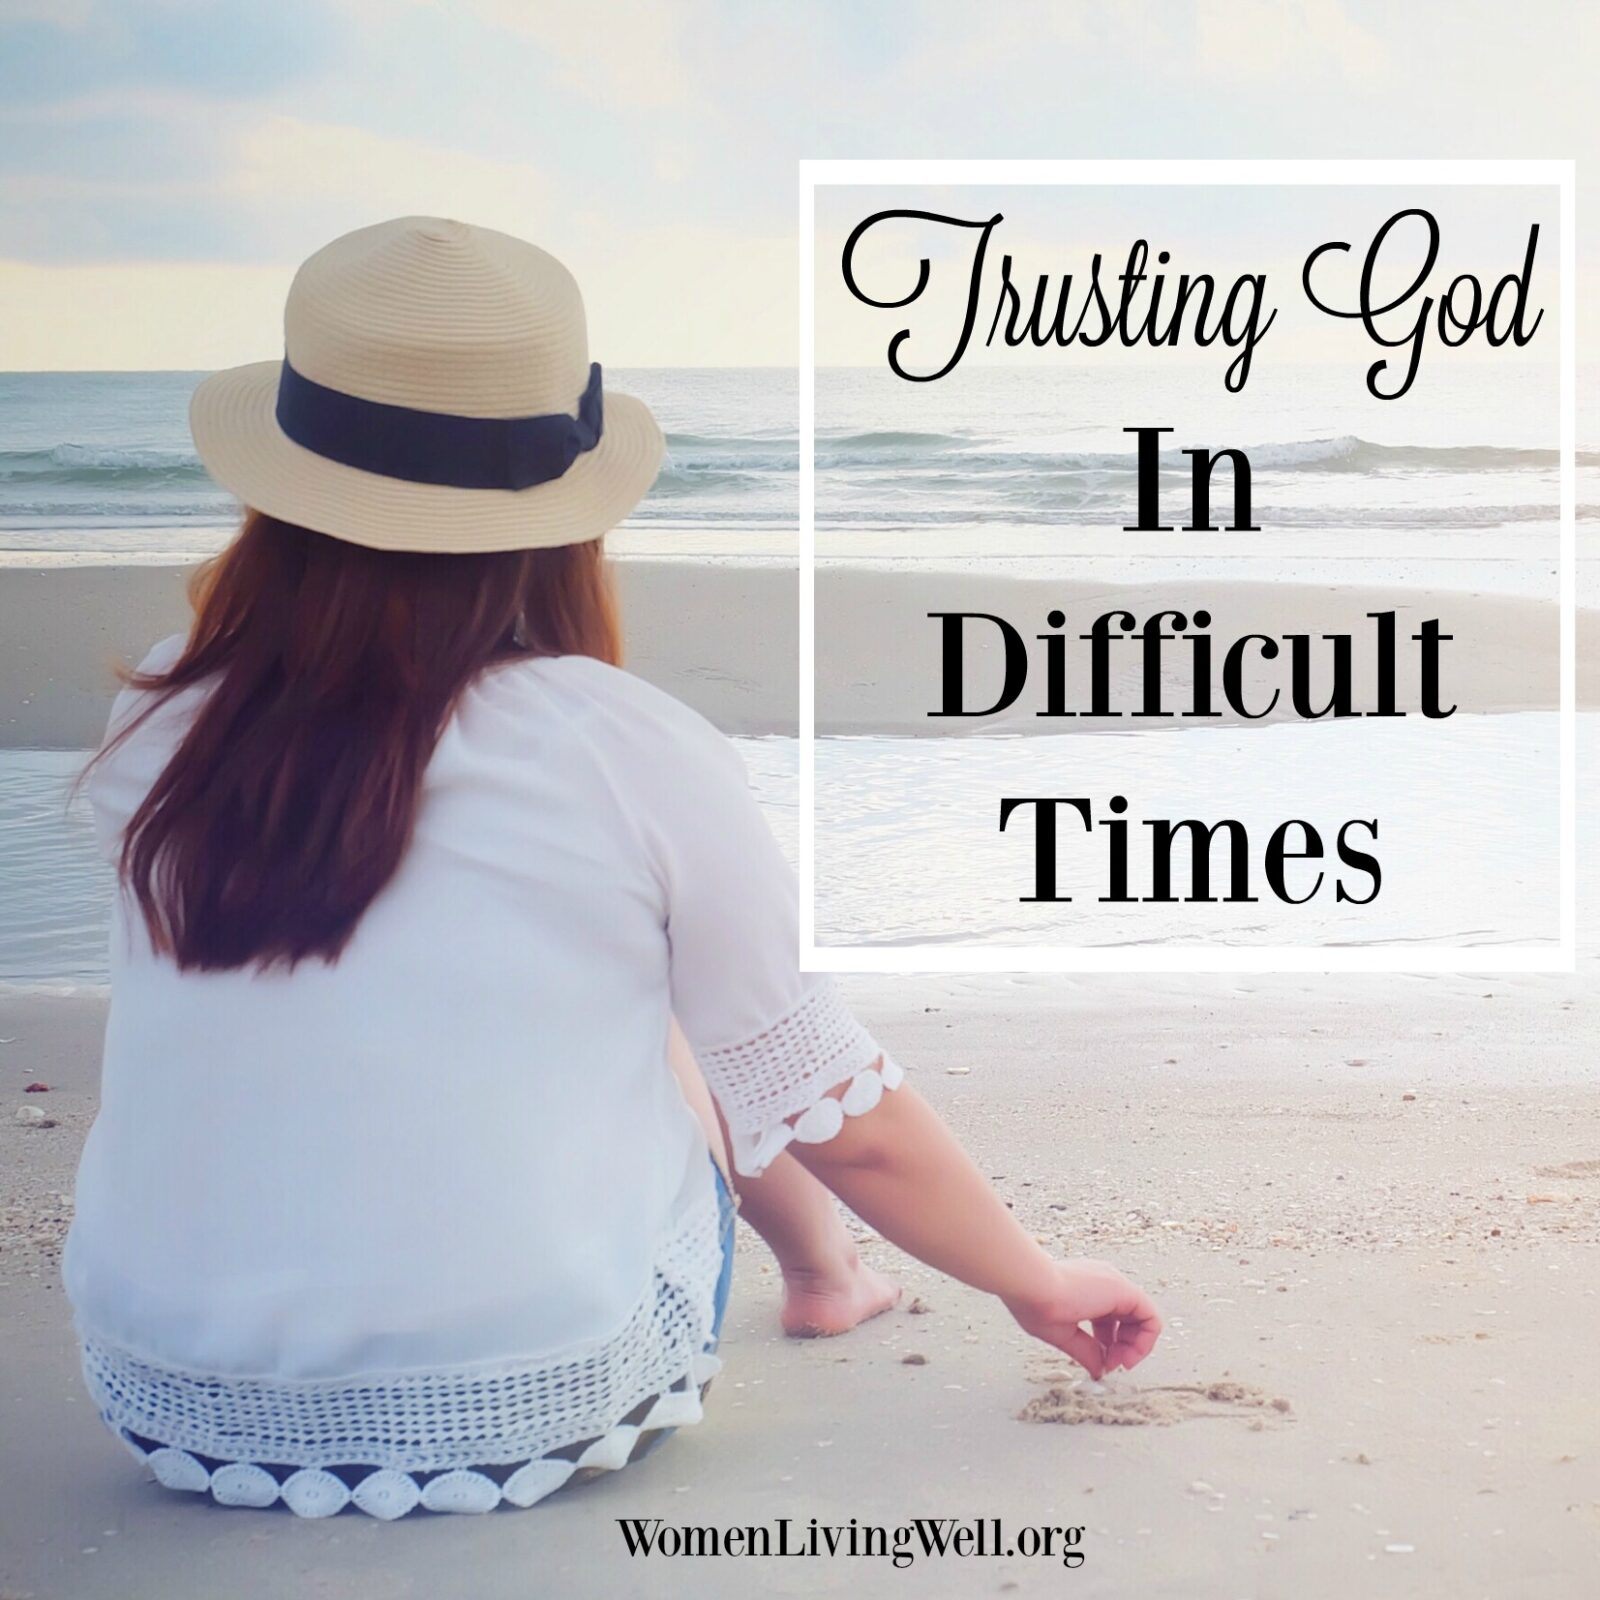 Scripture trusting god during difficult times